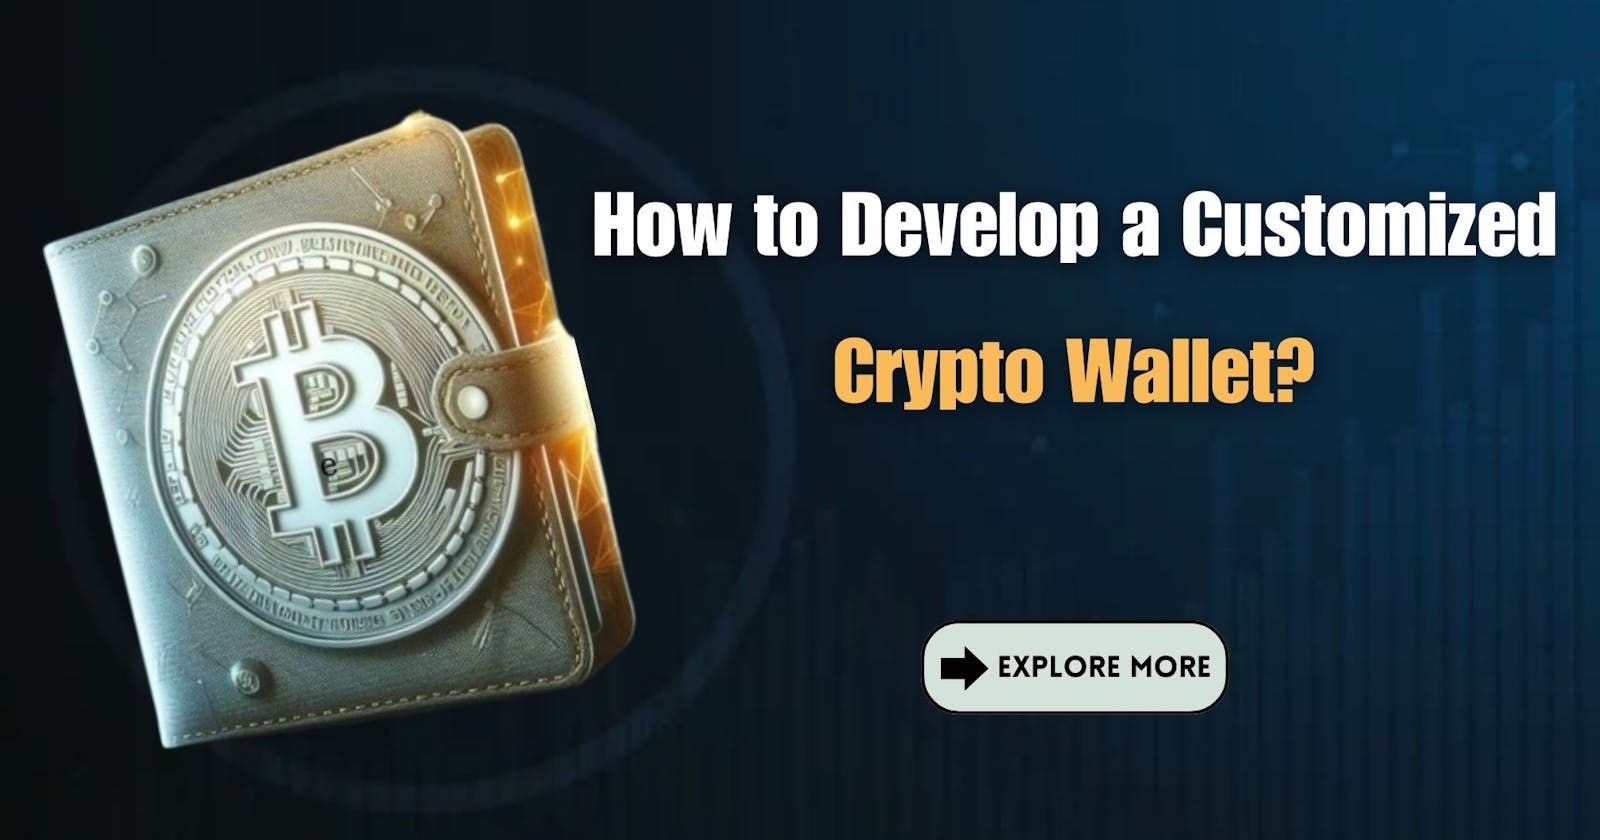 How to Develop a Customized Crypto Wallet?